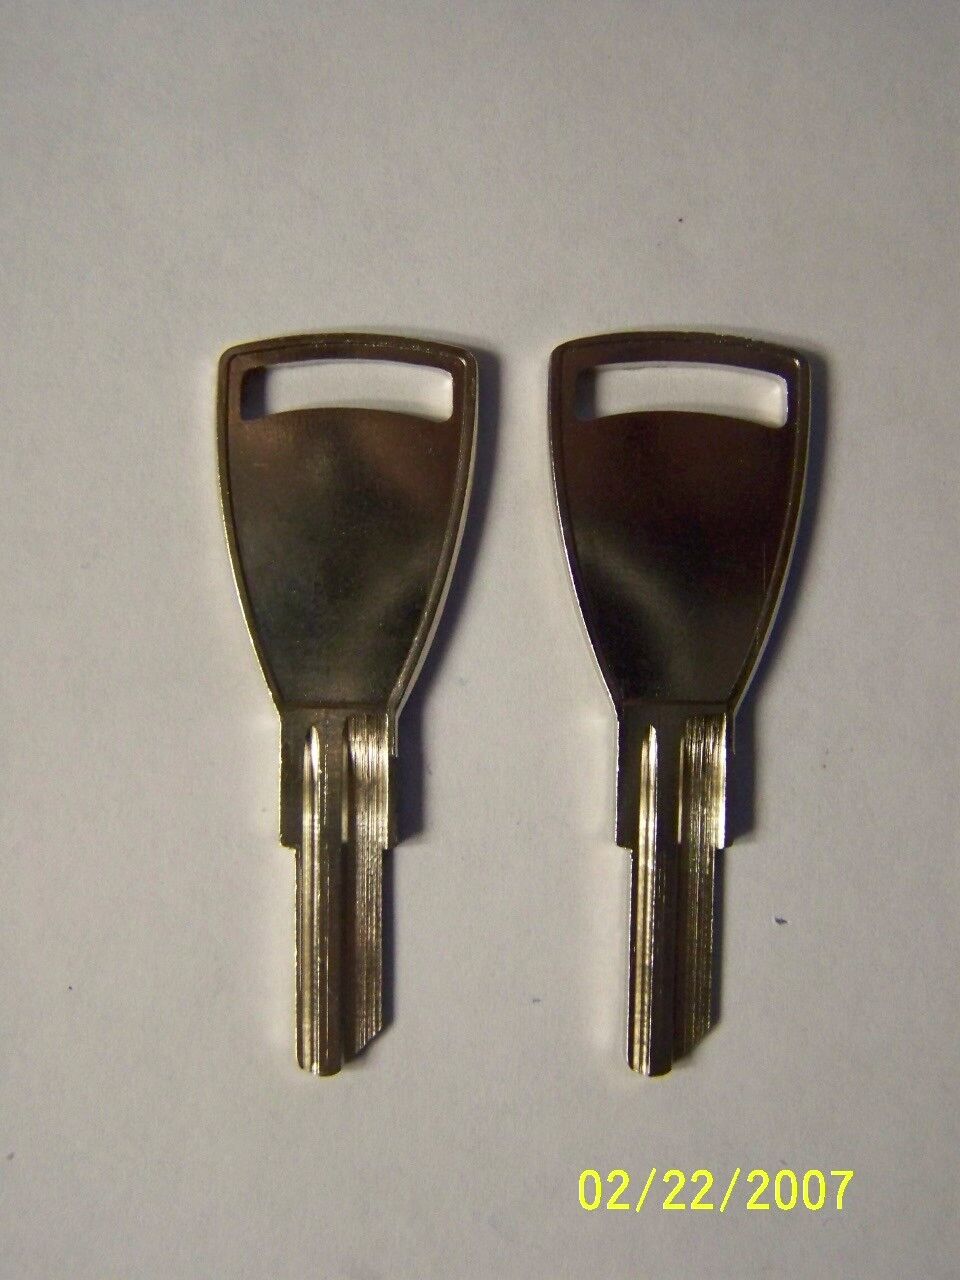 2 CESSNA AIRPLANE AFTERMARKET AIRCRAFT KEY BLANKS C1054B, HARD TO FIND